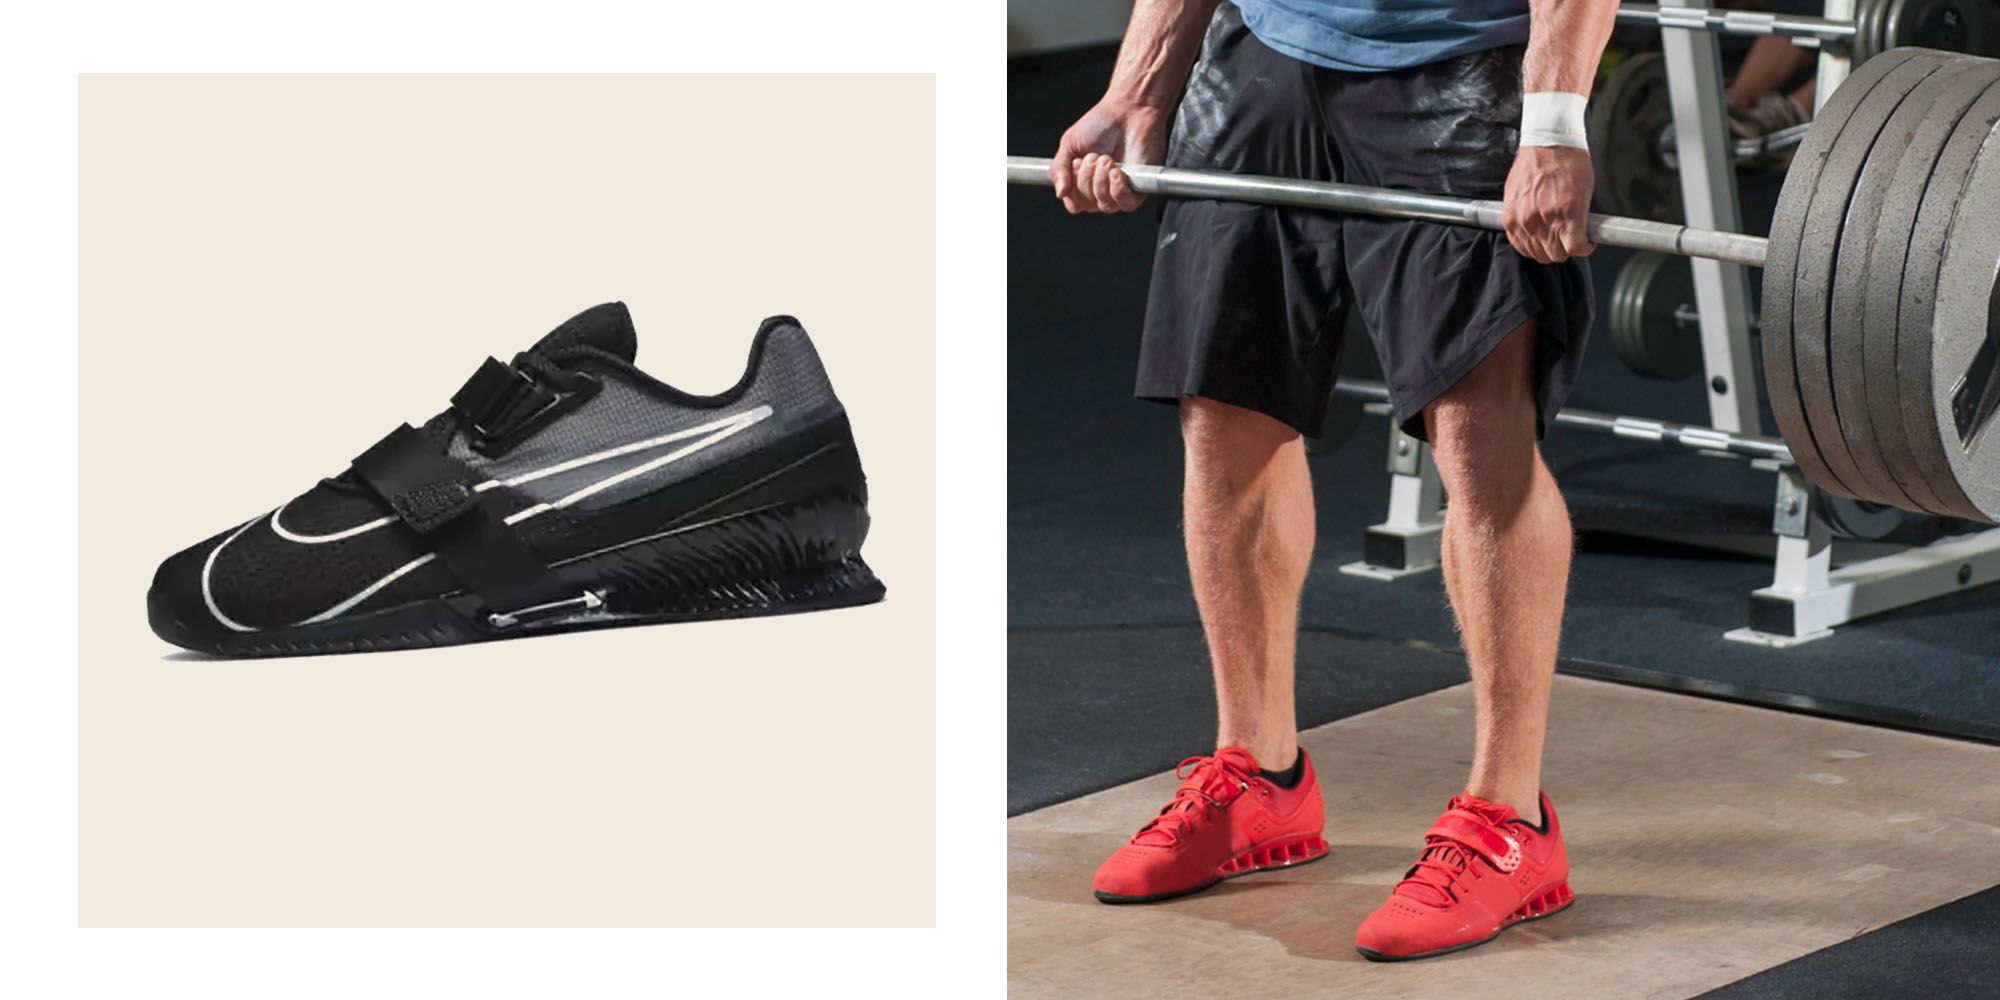 Should You Buy Weight Lifting Shoes?